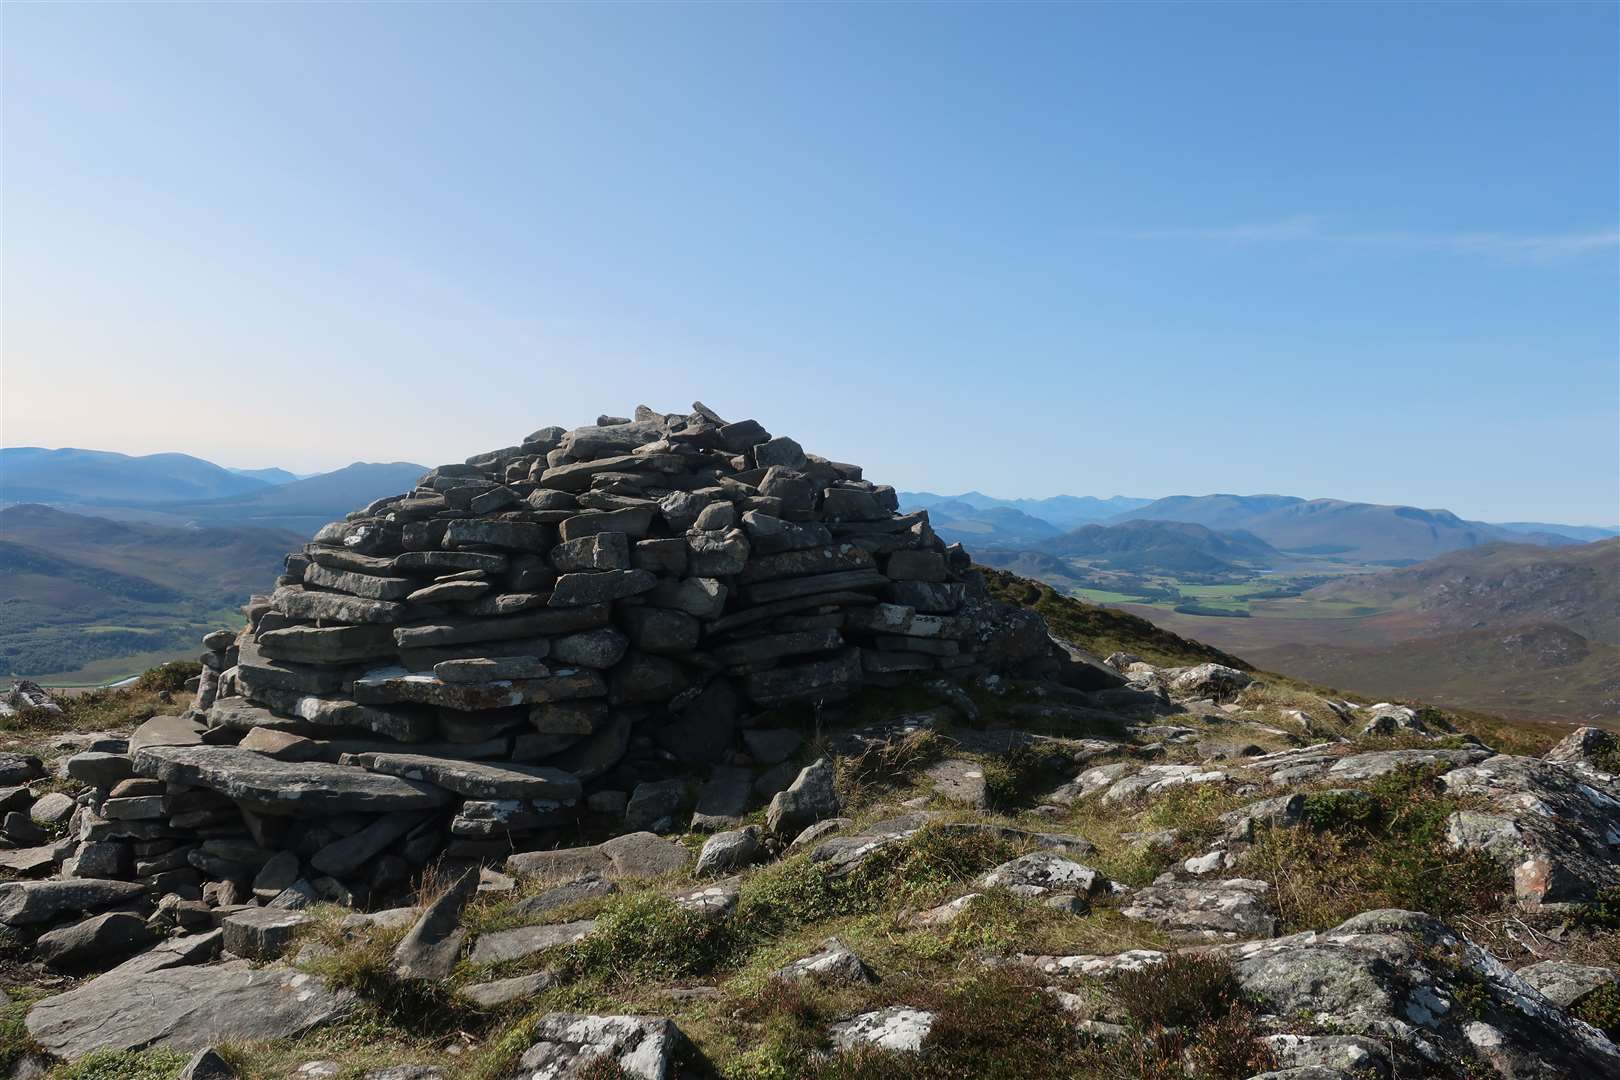 The summit cairn on top of Creag Dhubh.